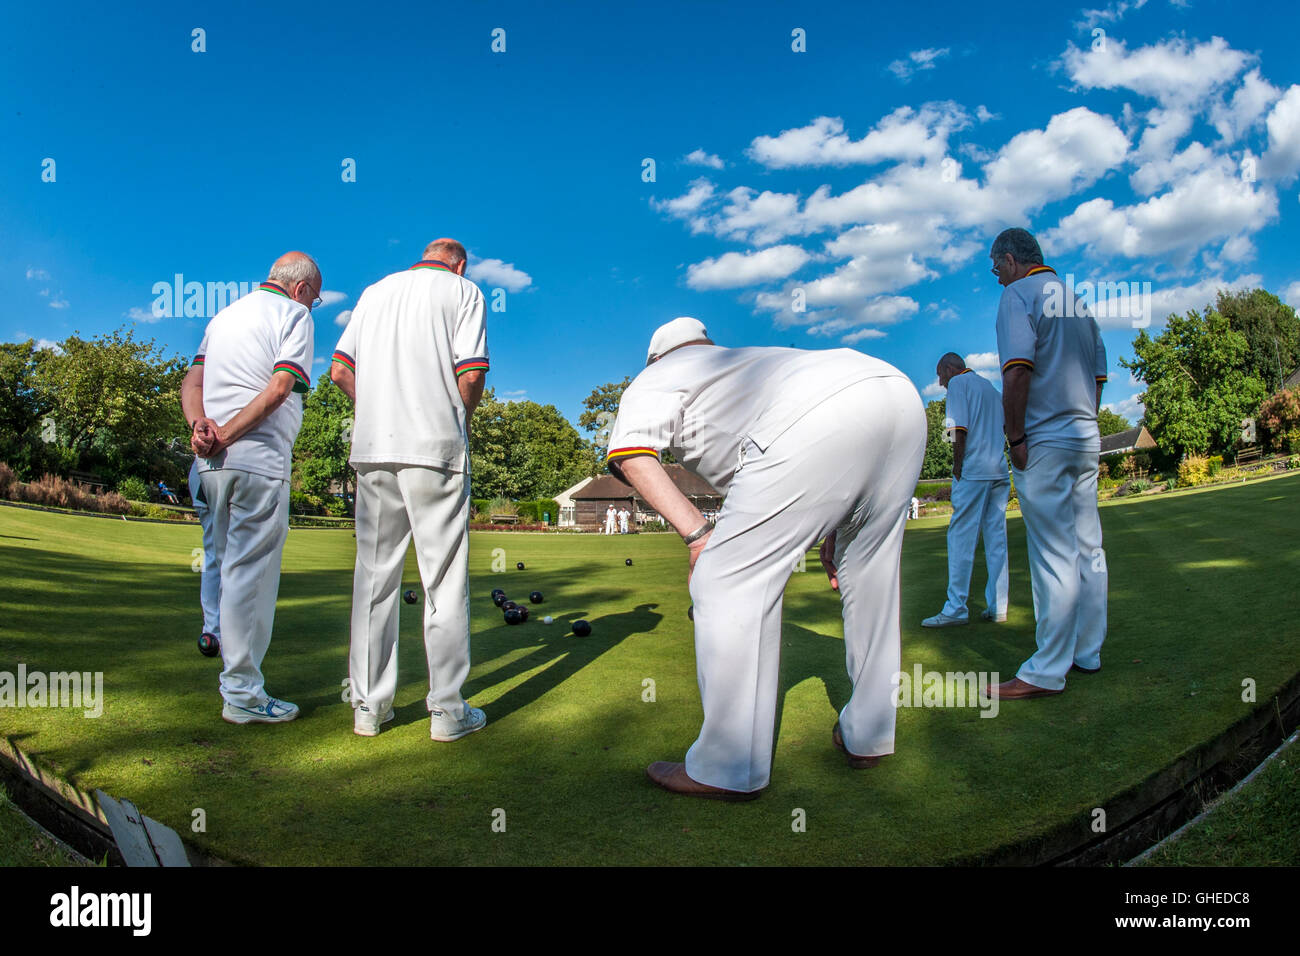 A game of bowls on an English summer's day Stock Photo